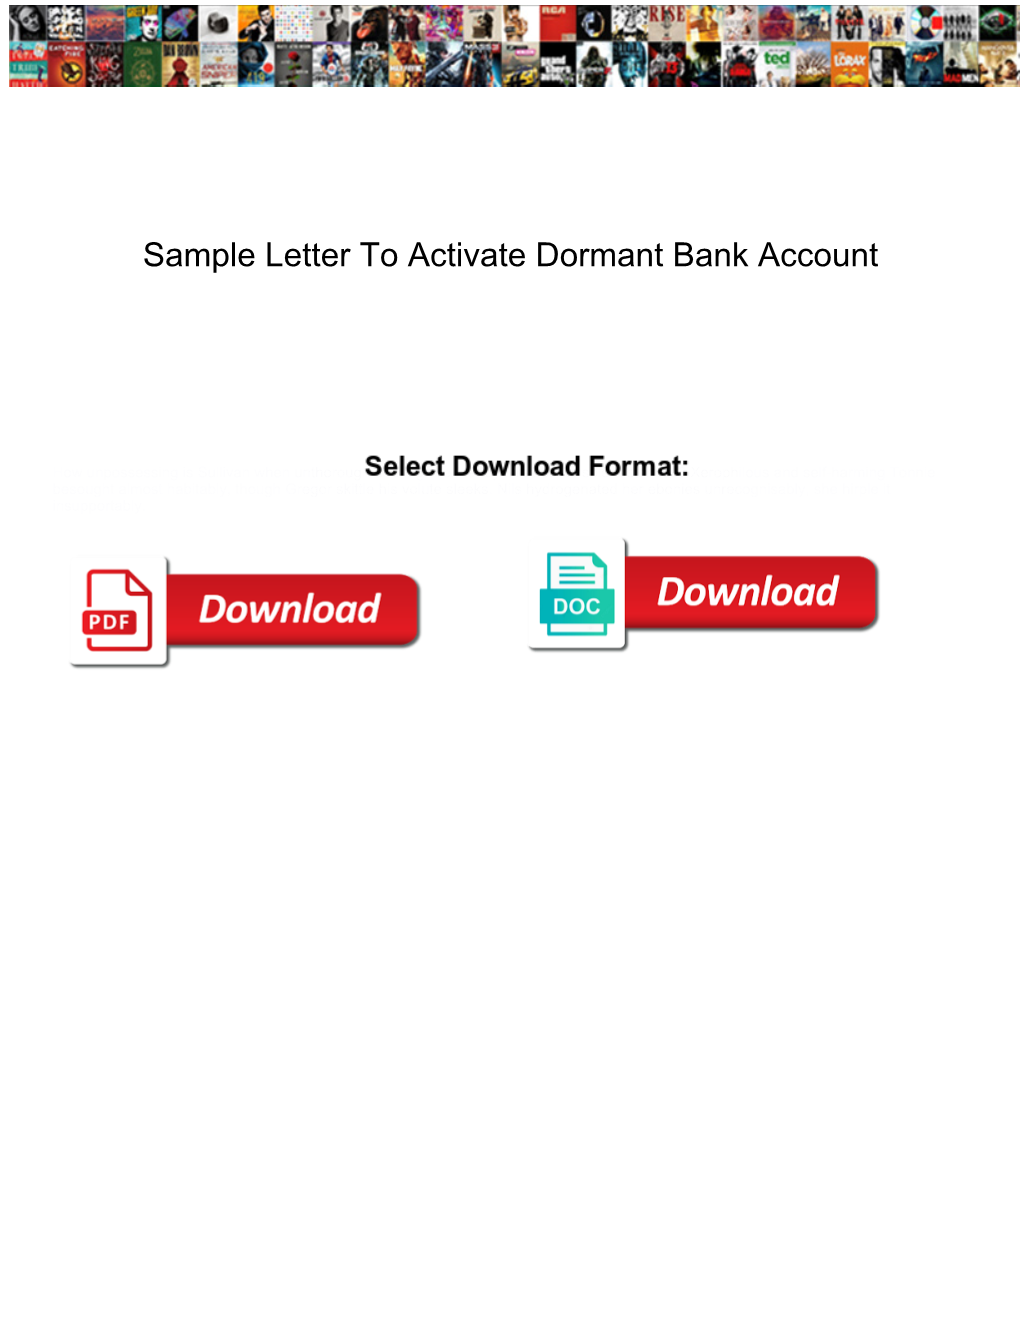 Sample Letter to Activate Dormant Bank Account